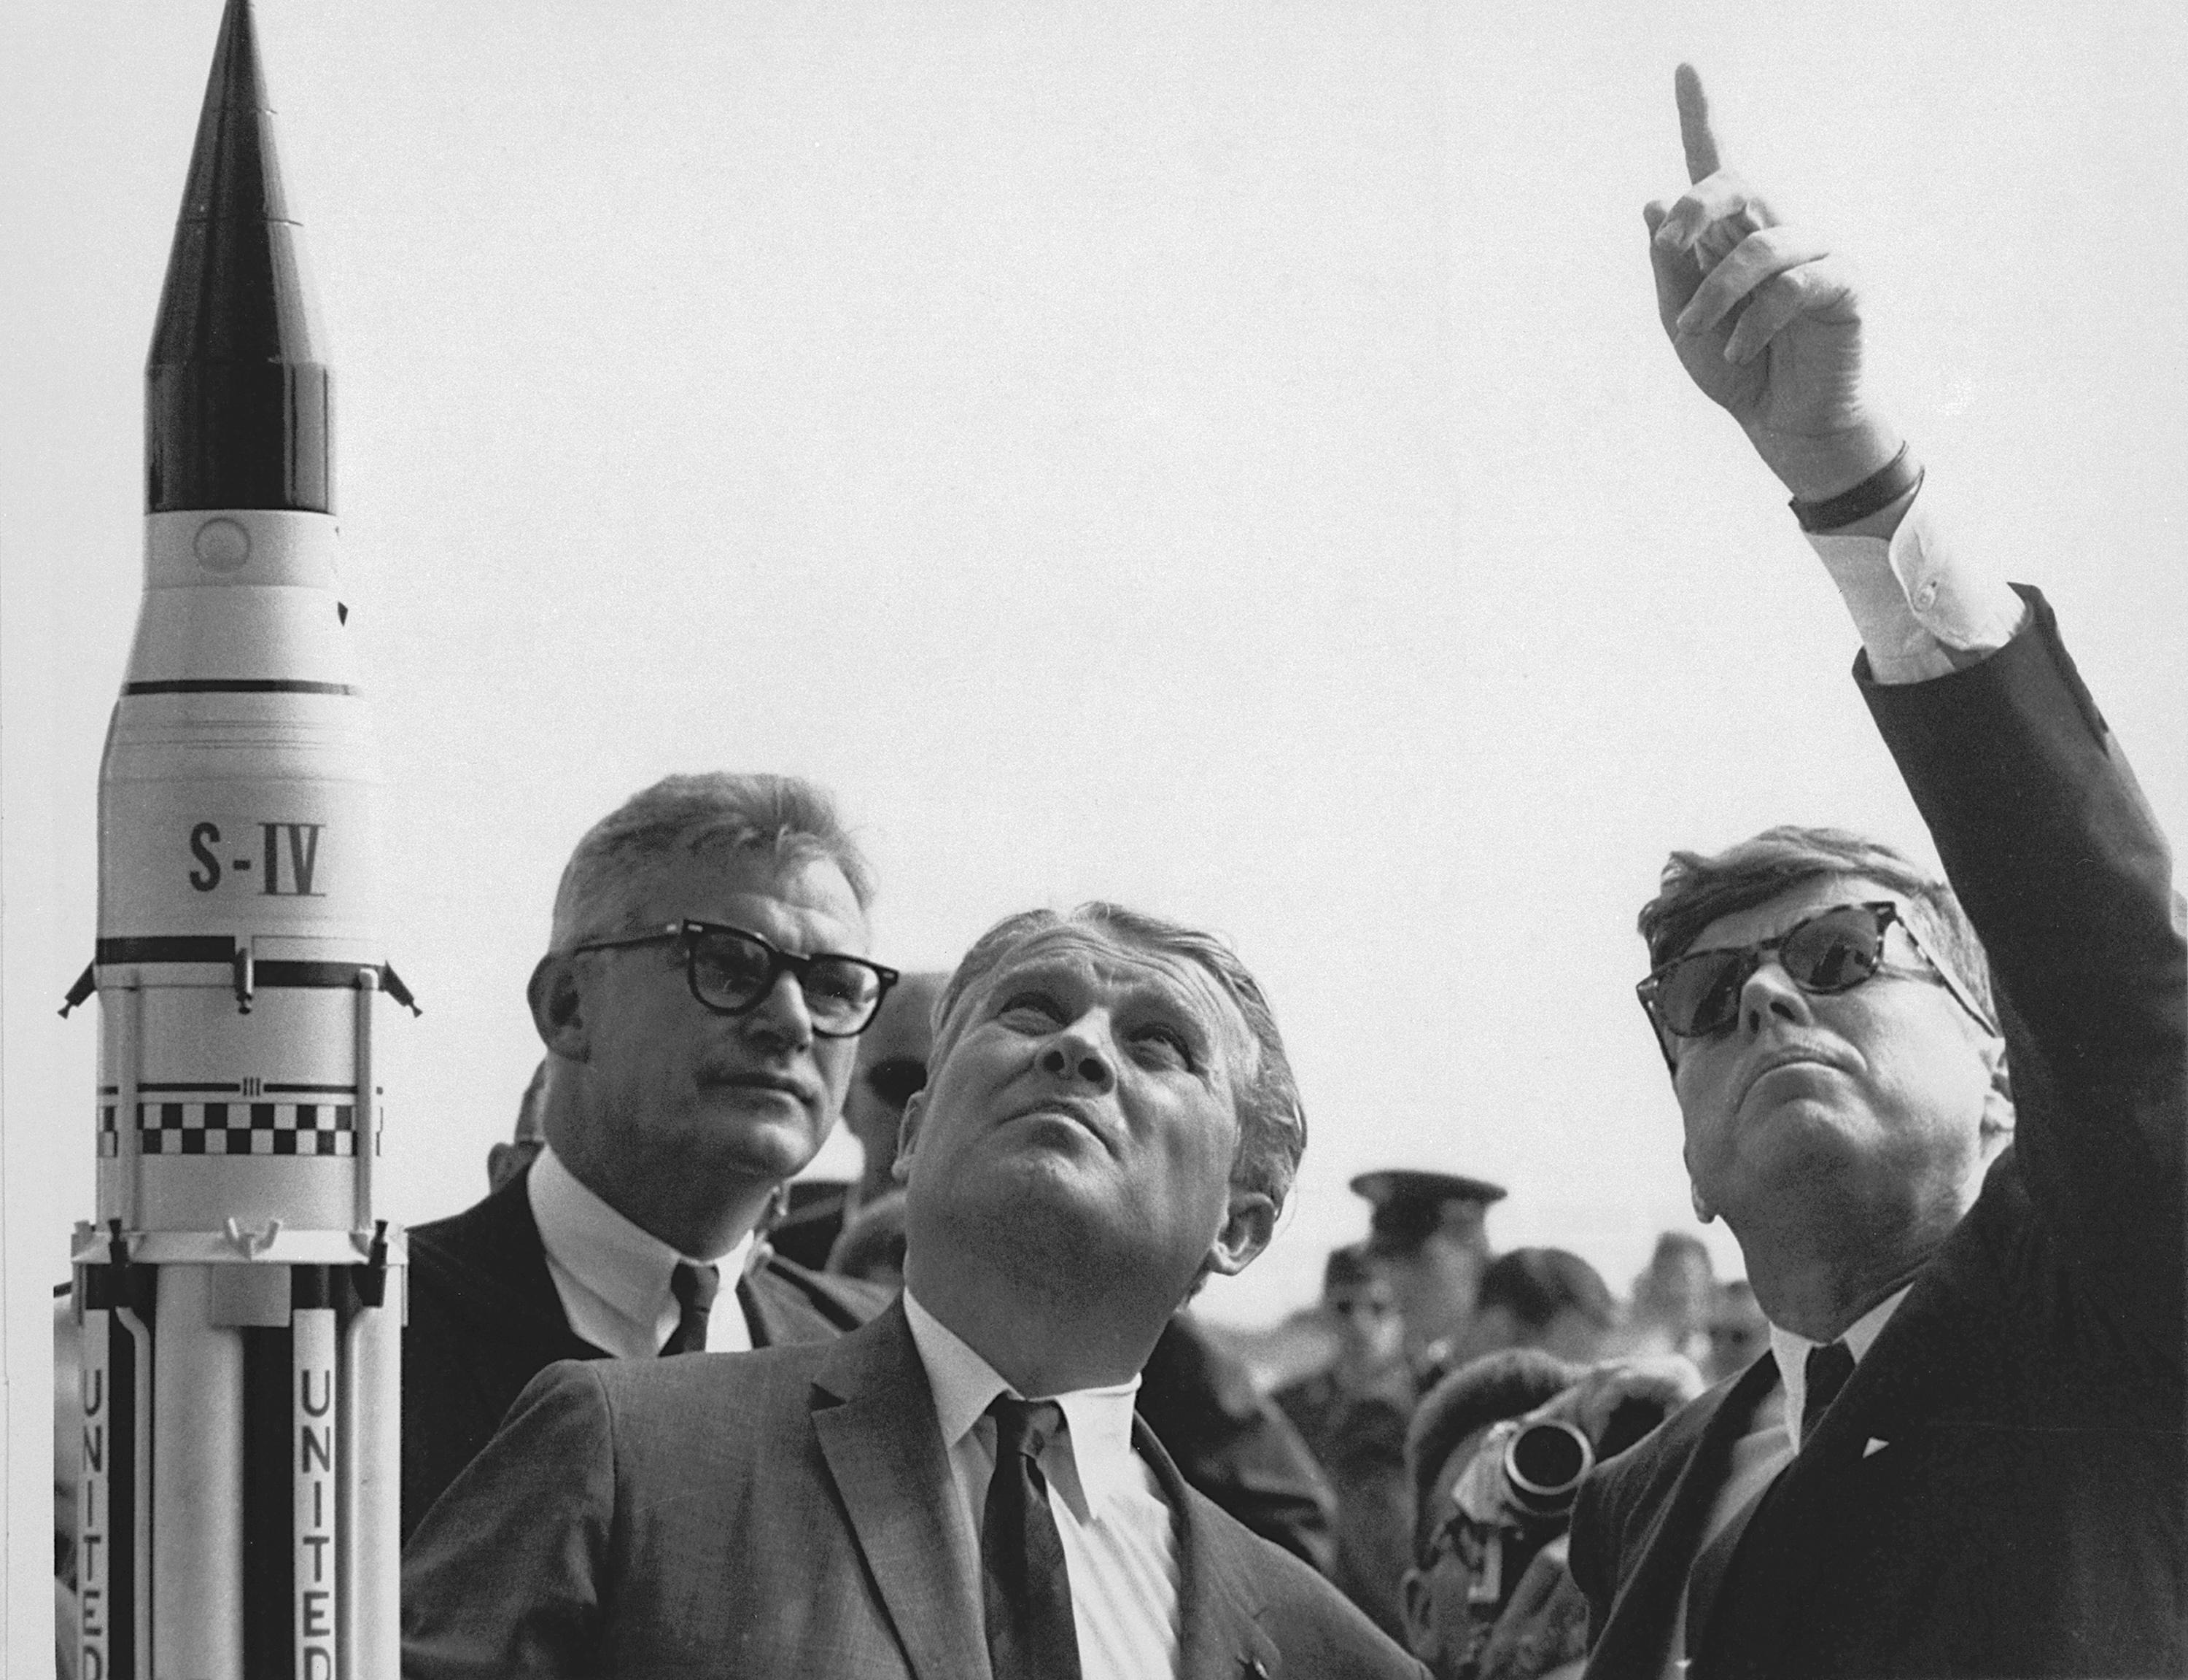 Wernher Von Braun explains the Saturn system to President John F. Kennedy at Cape Canaveral in 1963. Credit: NASA.